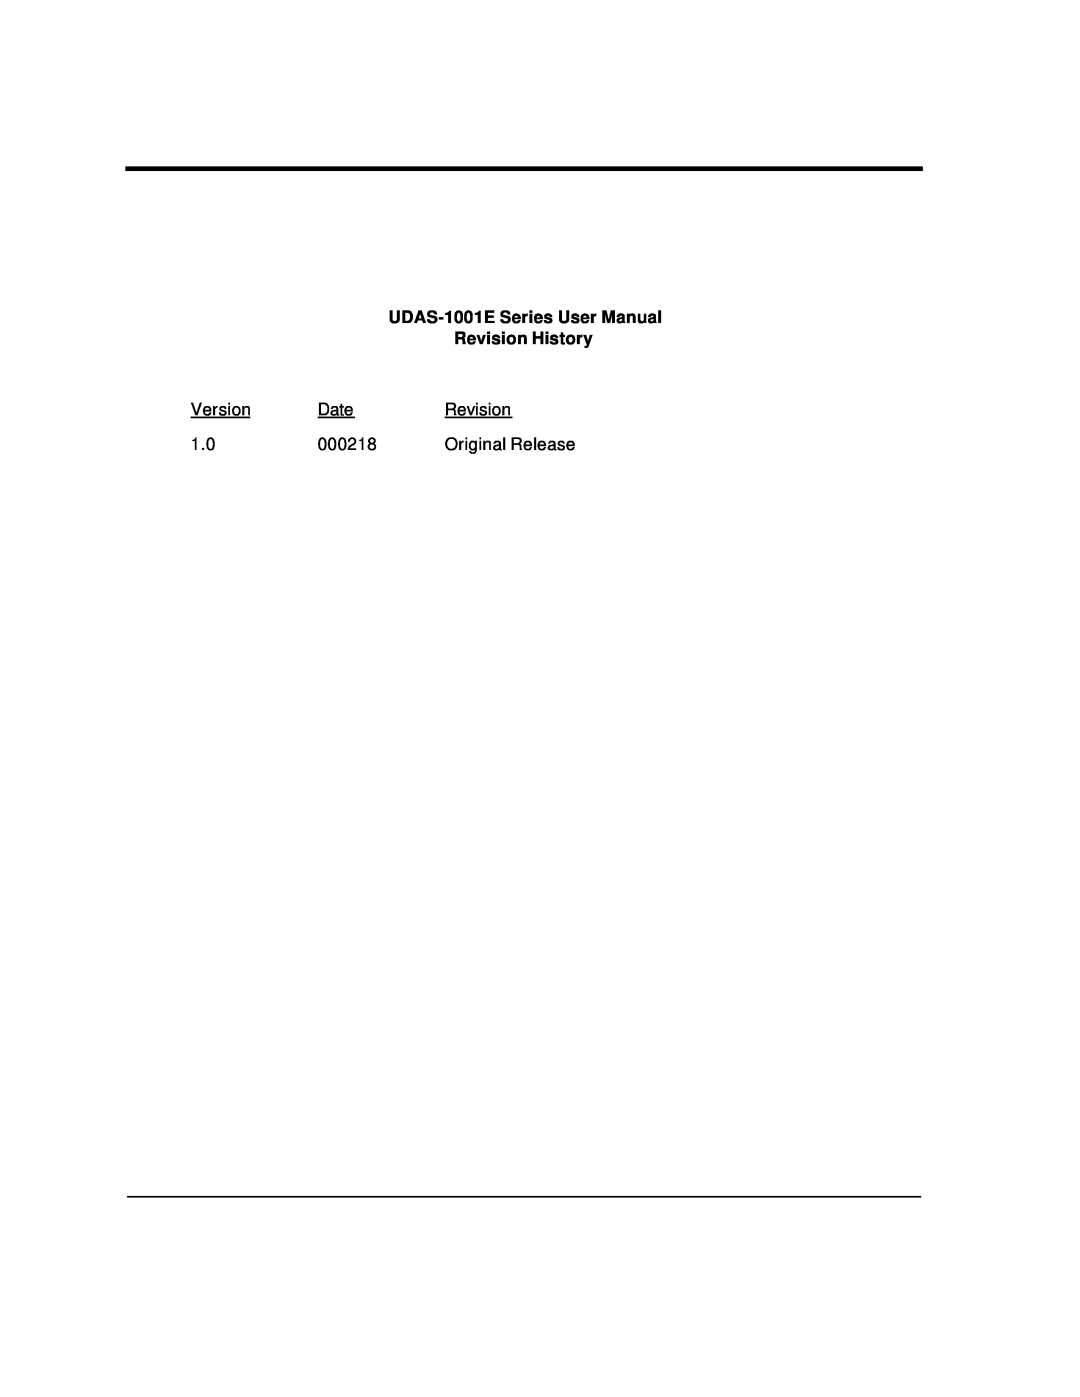 Intelligent Motion Systems UDAS-1001E Series User Manual, Revision History, Version, Date, 000218, Original Release 